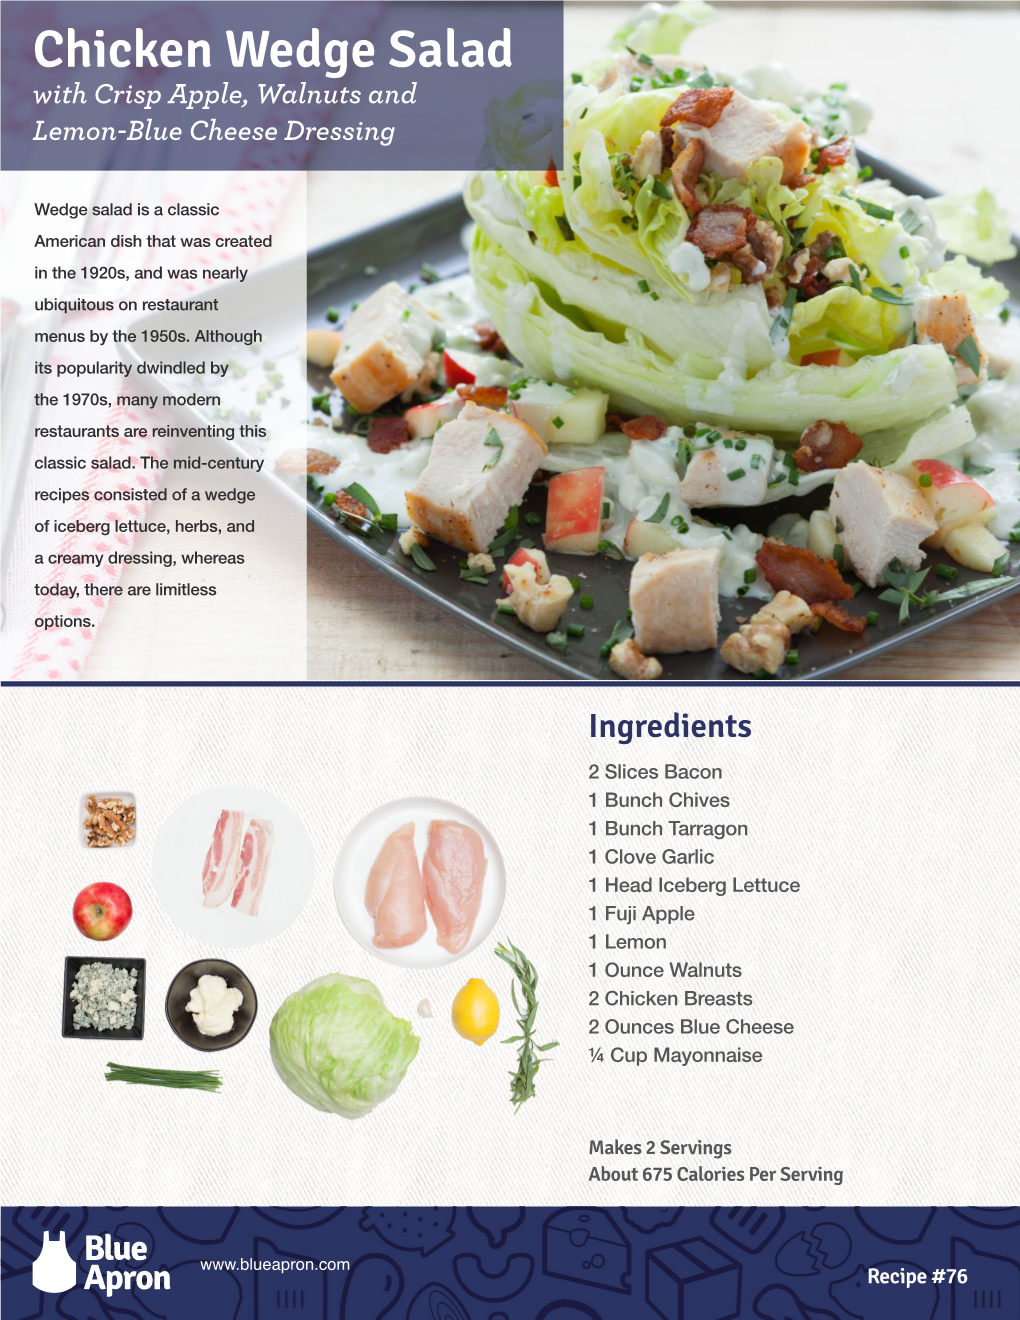 Chicken Wedge Salad with Crisp Apple, Walnuts and Lemon-Blue Cheese Dressing